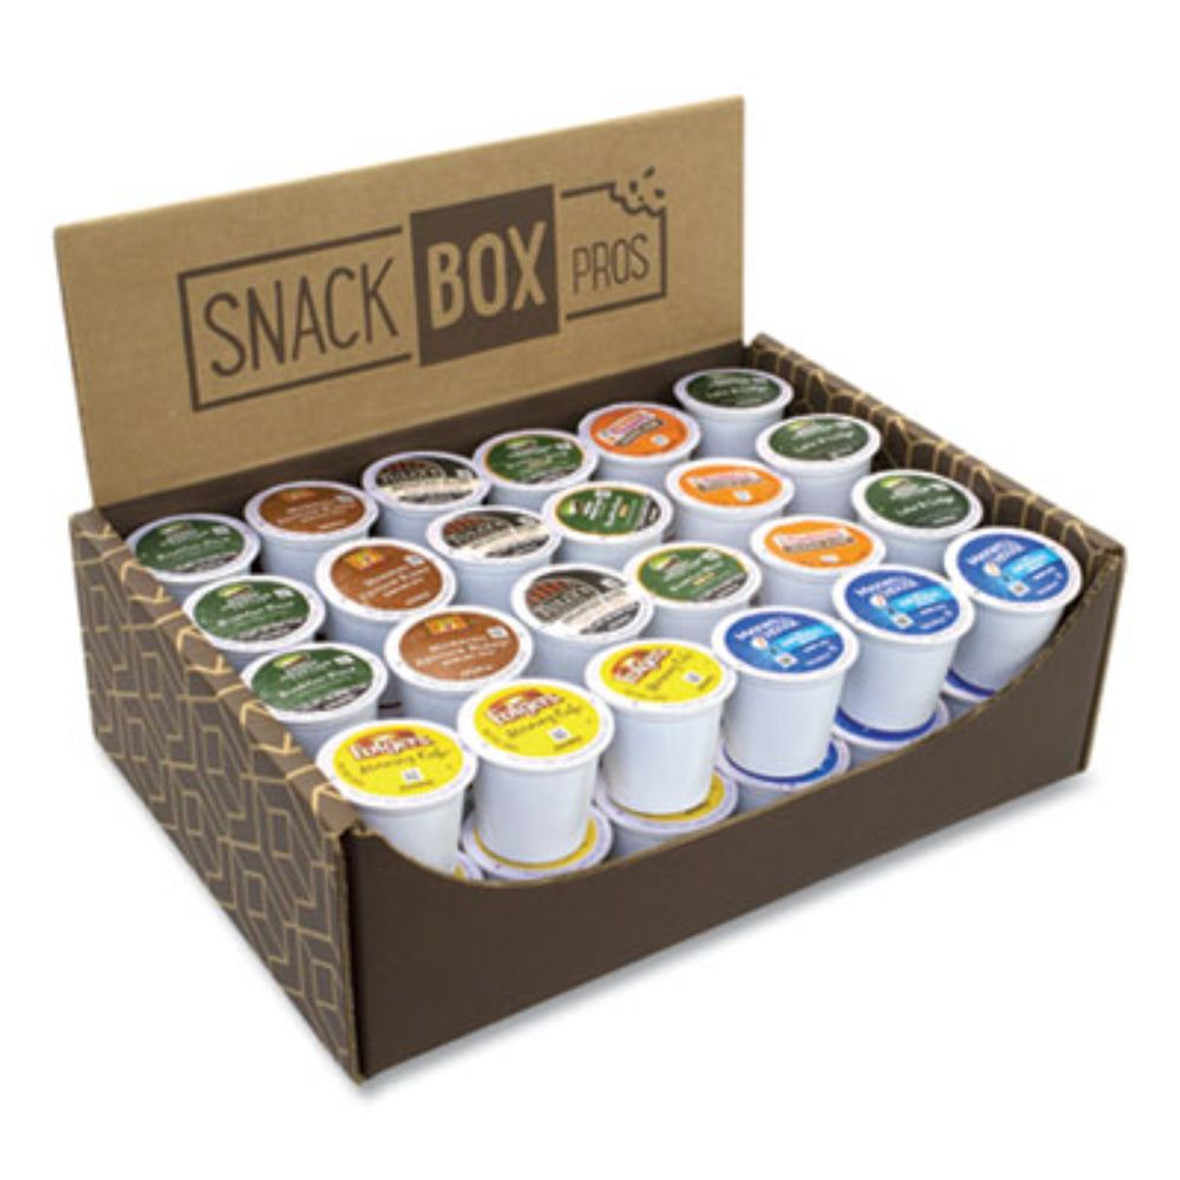 Snack Box Pros What's For Breakfast K-cup